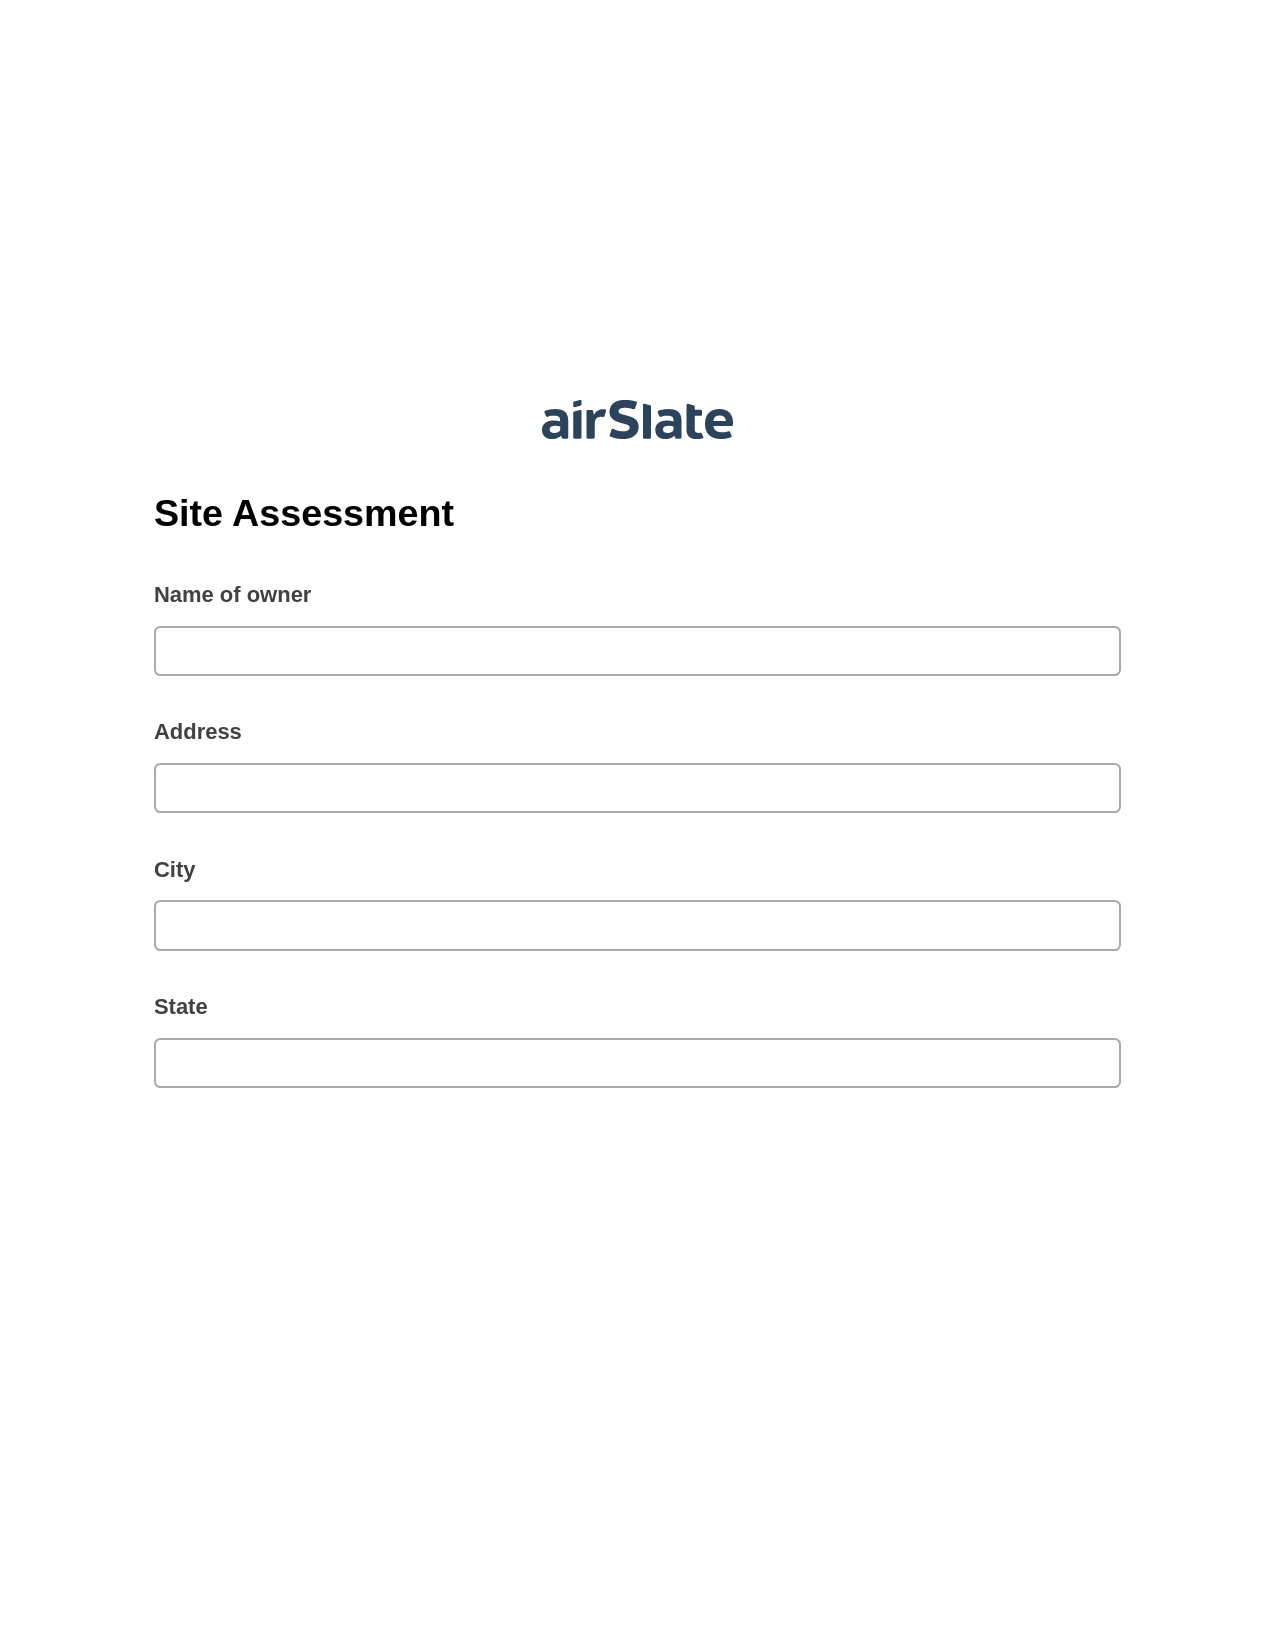 Site Assessment Pre-fill from CSV File Bot, Create slate bot, Export to Salesforce Bot